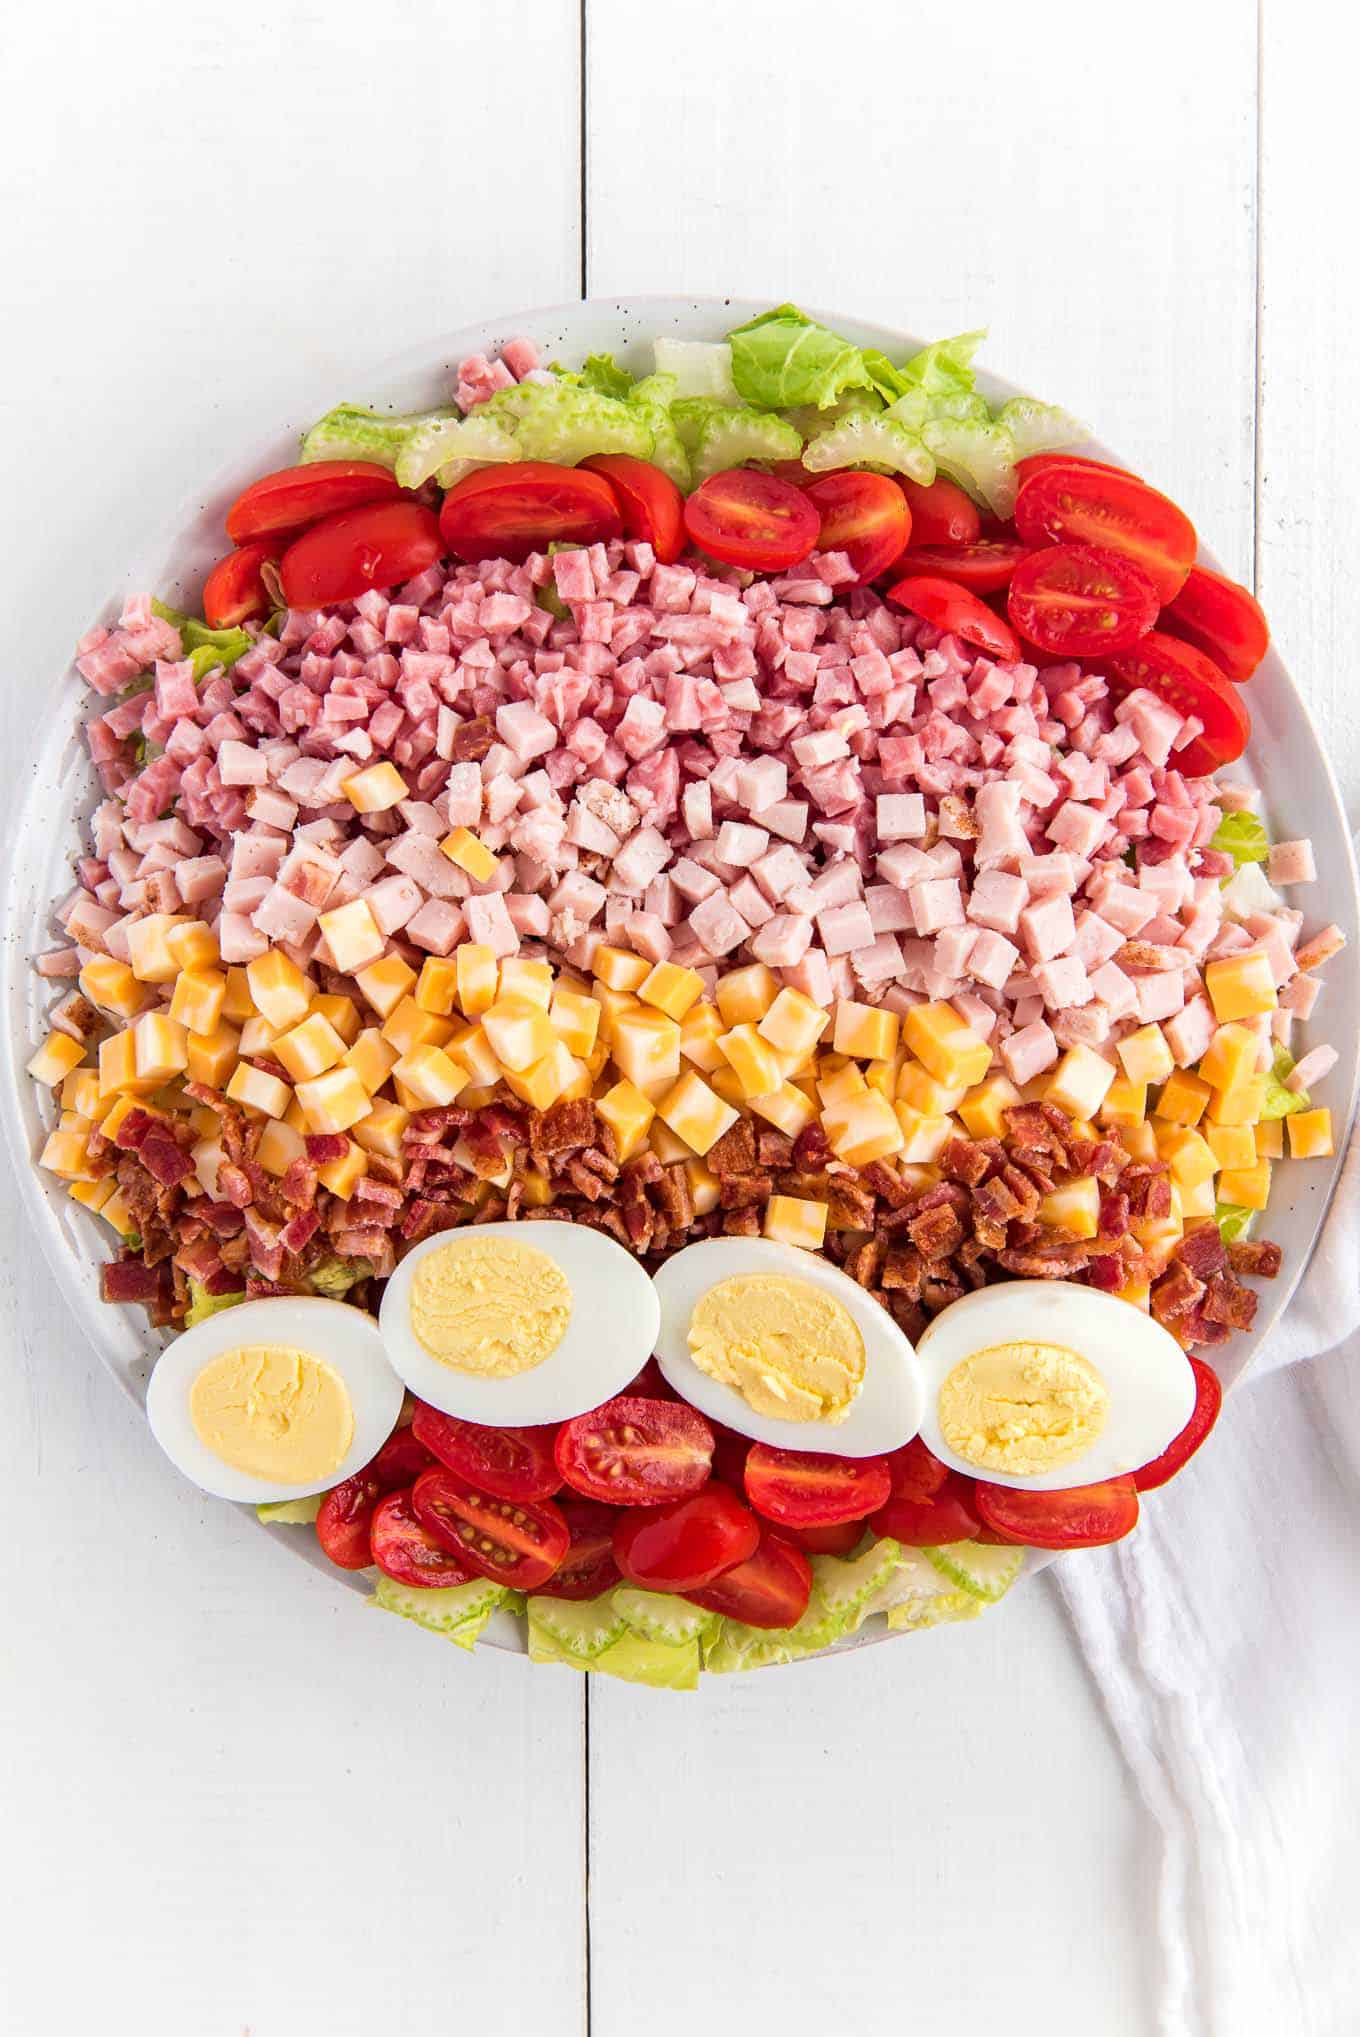 A Chef salad on a white platter on the table.